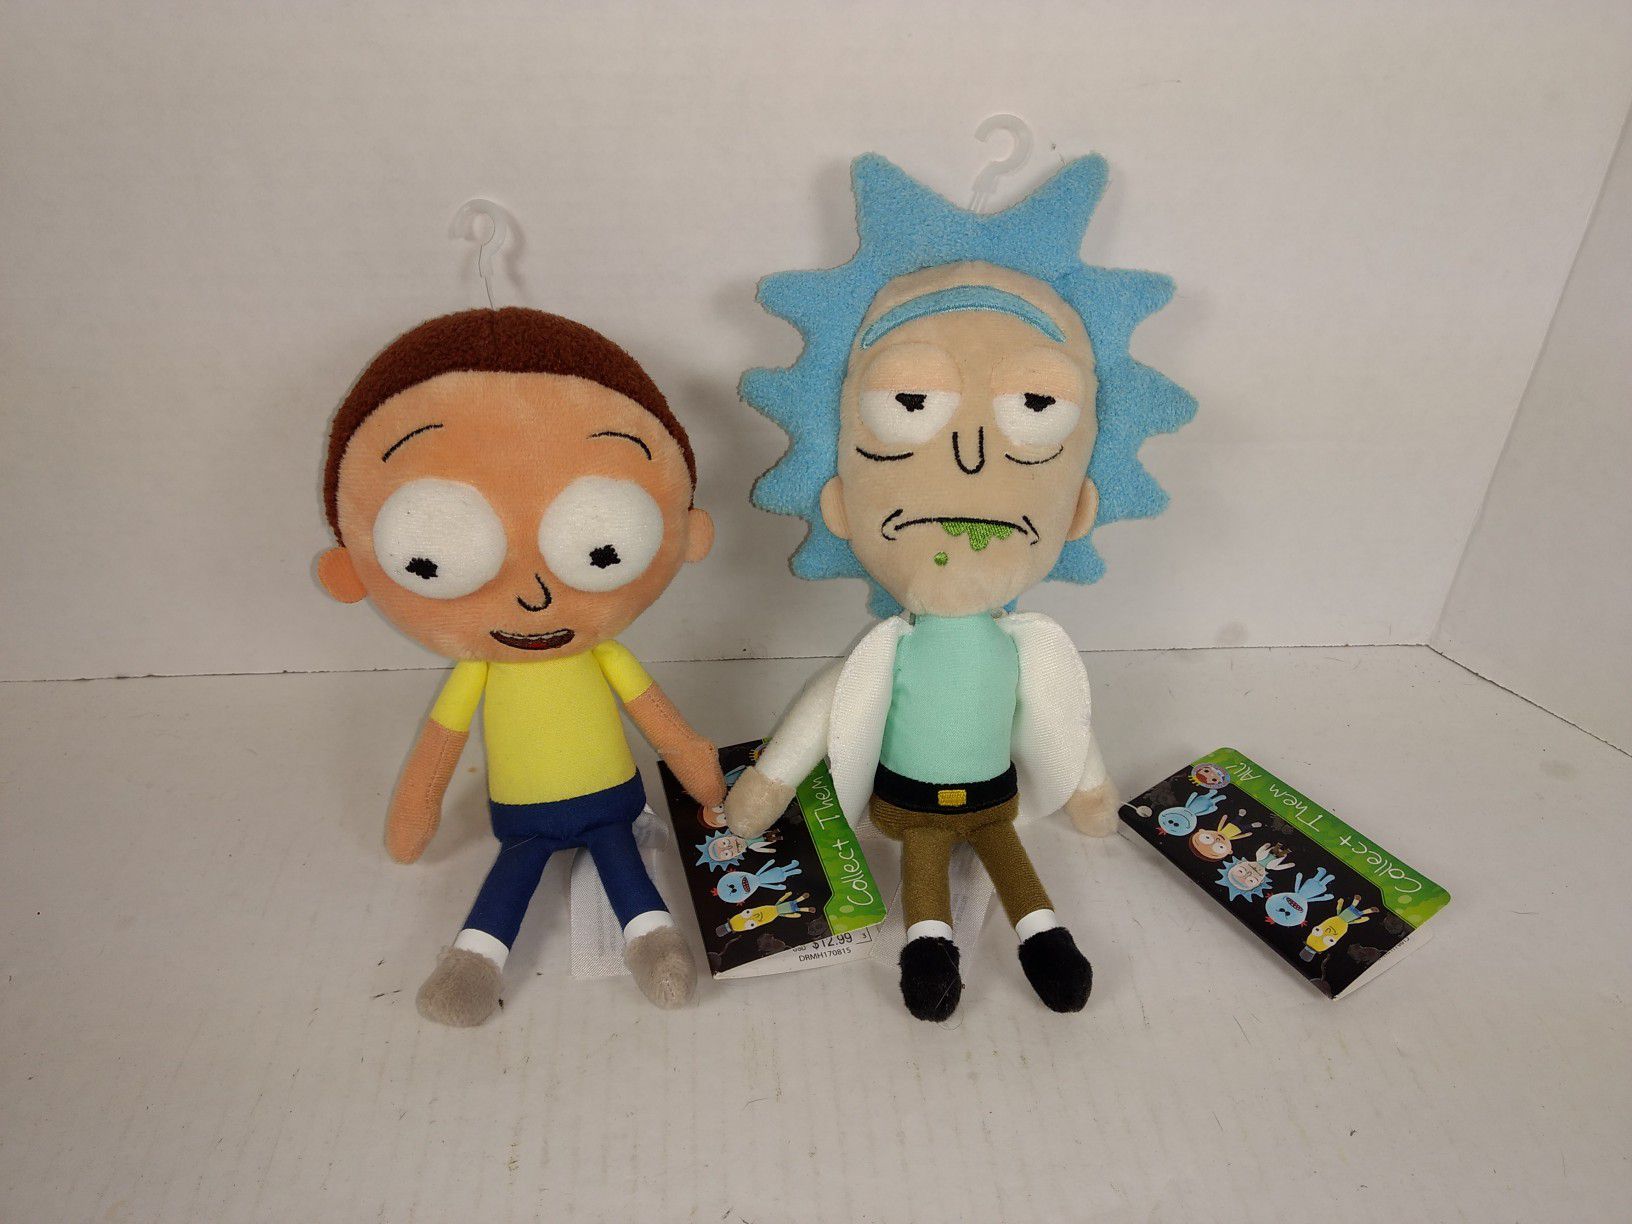 Rick and Morty Galactic Plushies Stuffed Figures